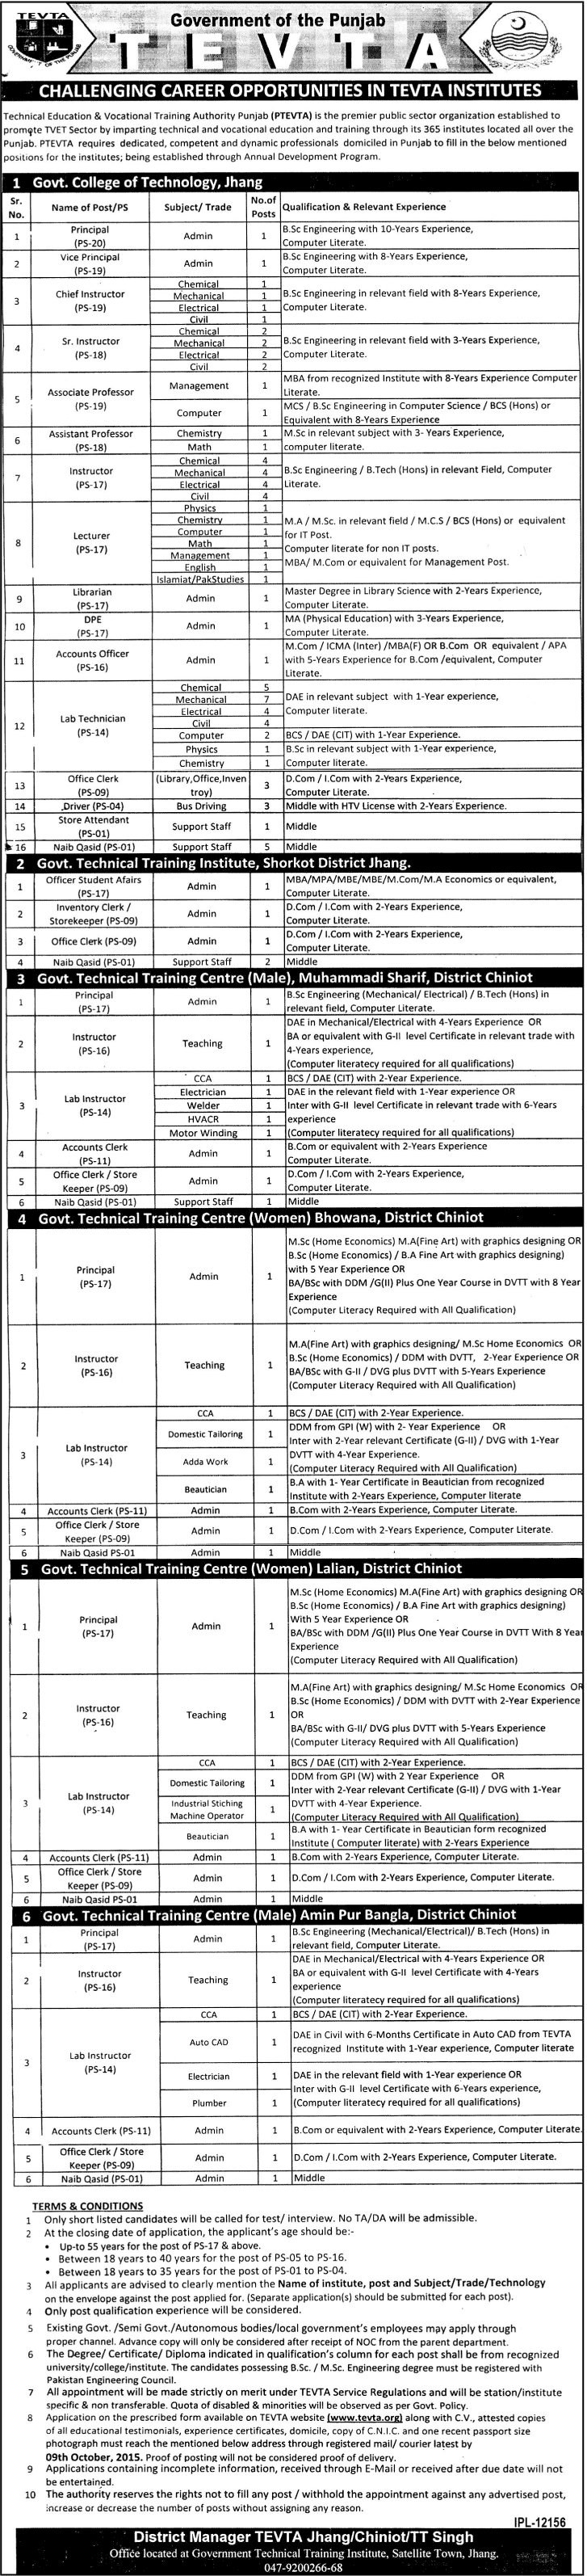 New Jobs in Technical Education & Vocational Training Authority (TEVTA), Government of The Punjab - Jhang Job from Jang Newspaper on 17-9-2015